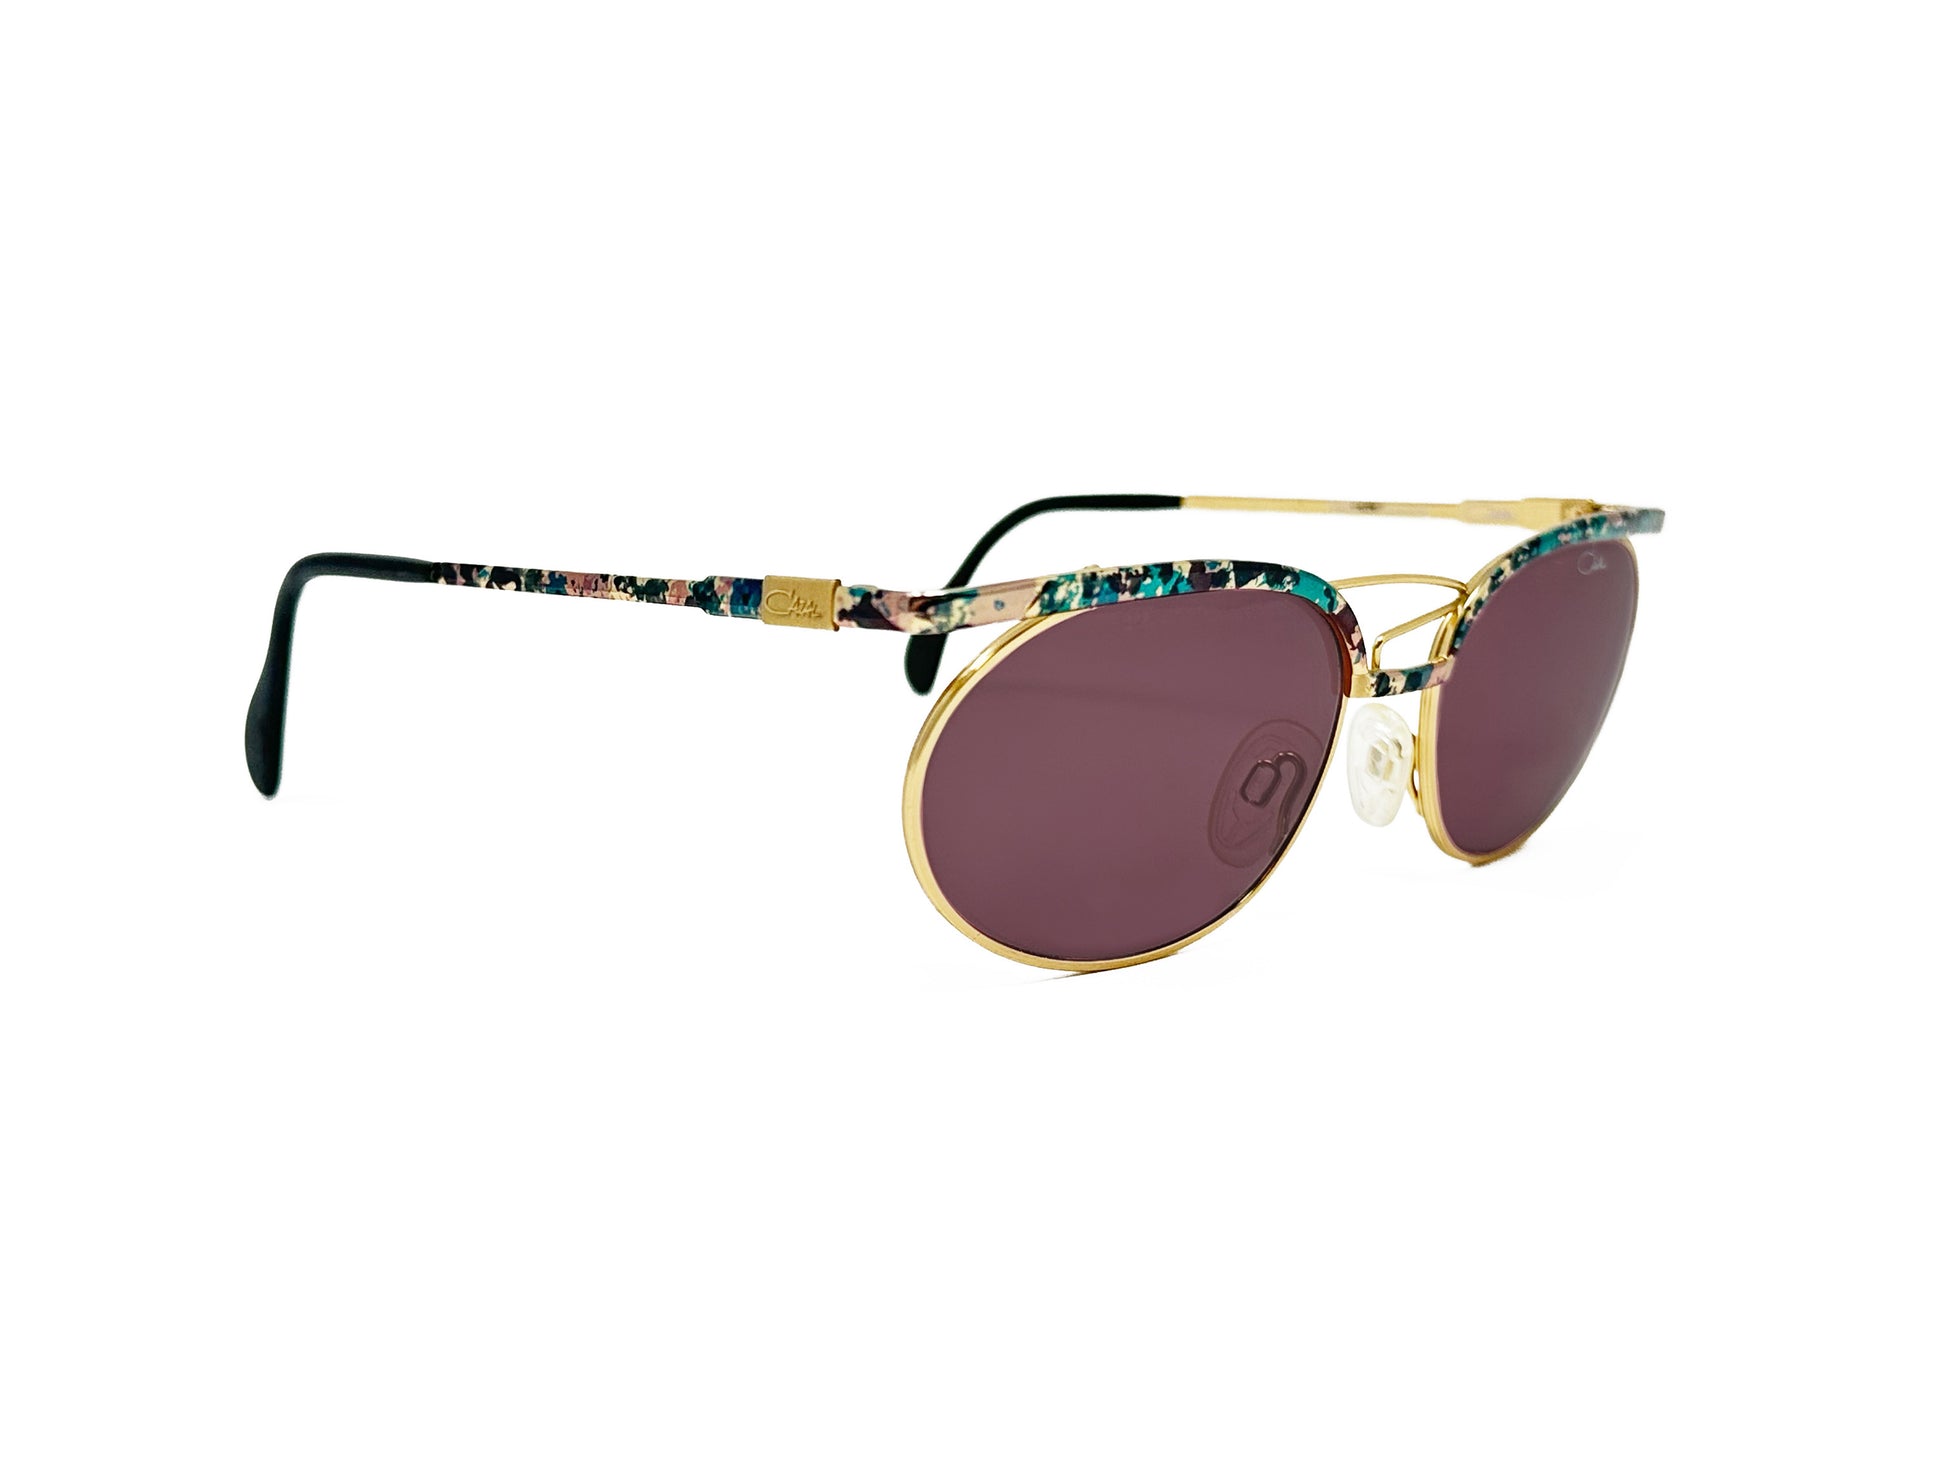 Cazal oval, metal sunglass with green tortoise bar across each lens and spiral wire on nose bridge. Model: 263/3. Color:425 Gold metal with green tortoise pattern. Side view.